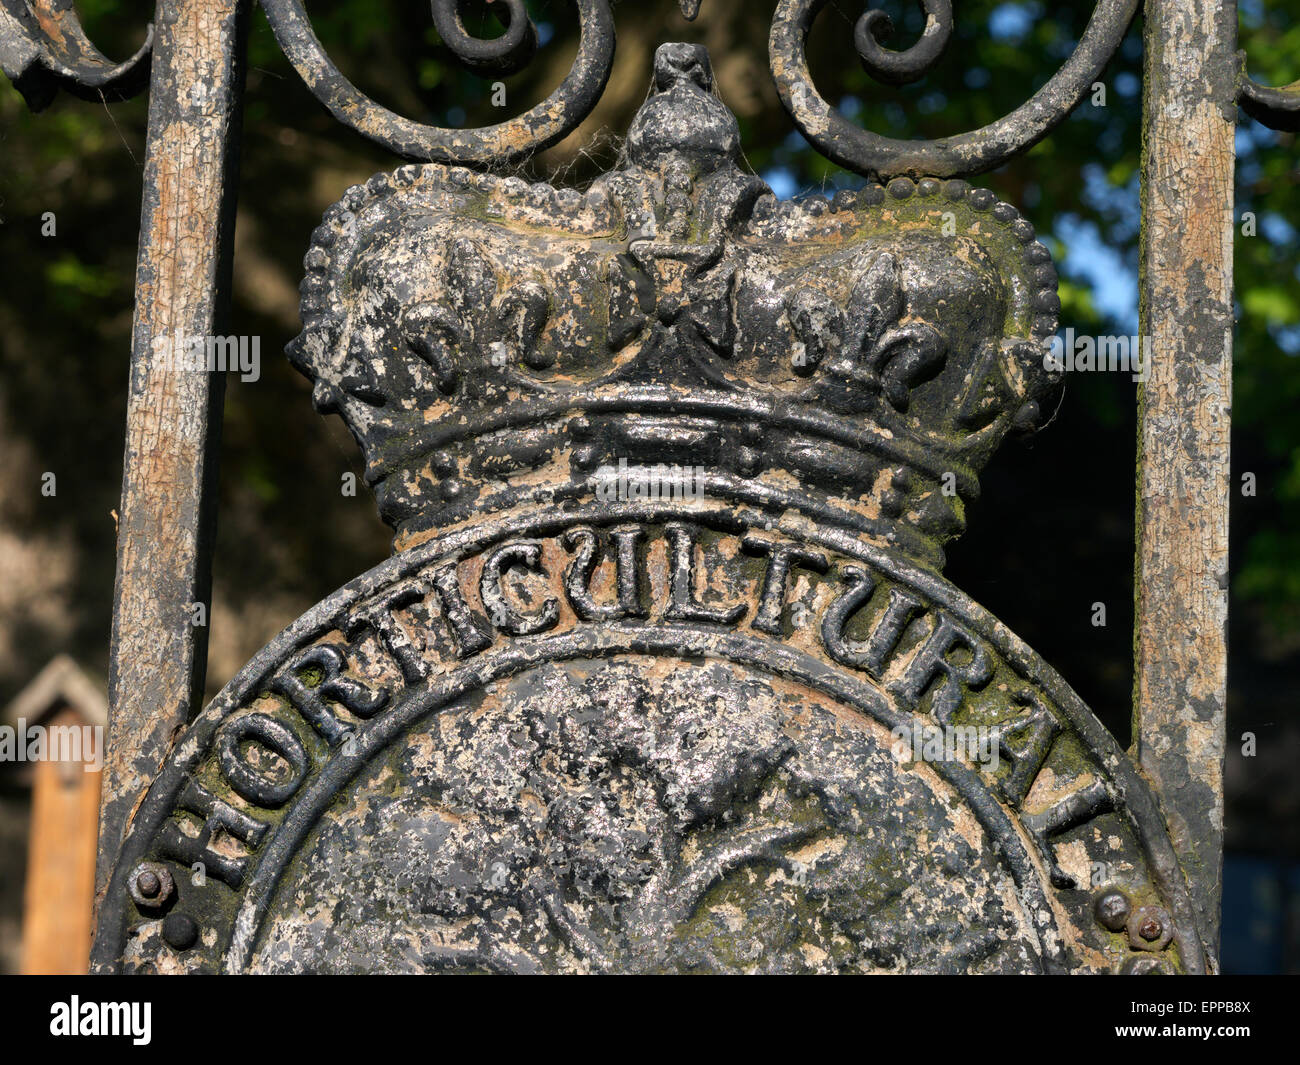 Close-up on weathered Royal Horticultural Society (RHS) metal plaque emblem on entrance gates with garden shed behind Stock Photo